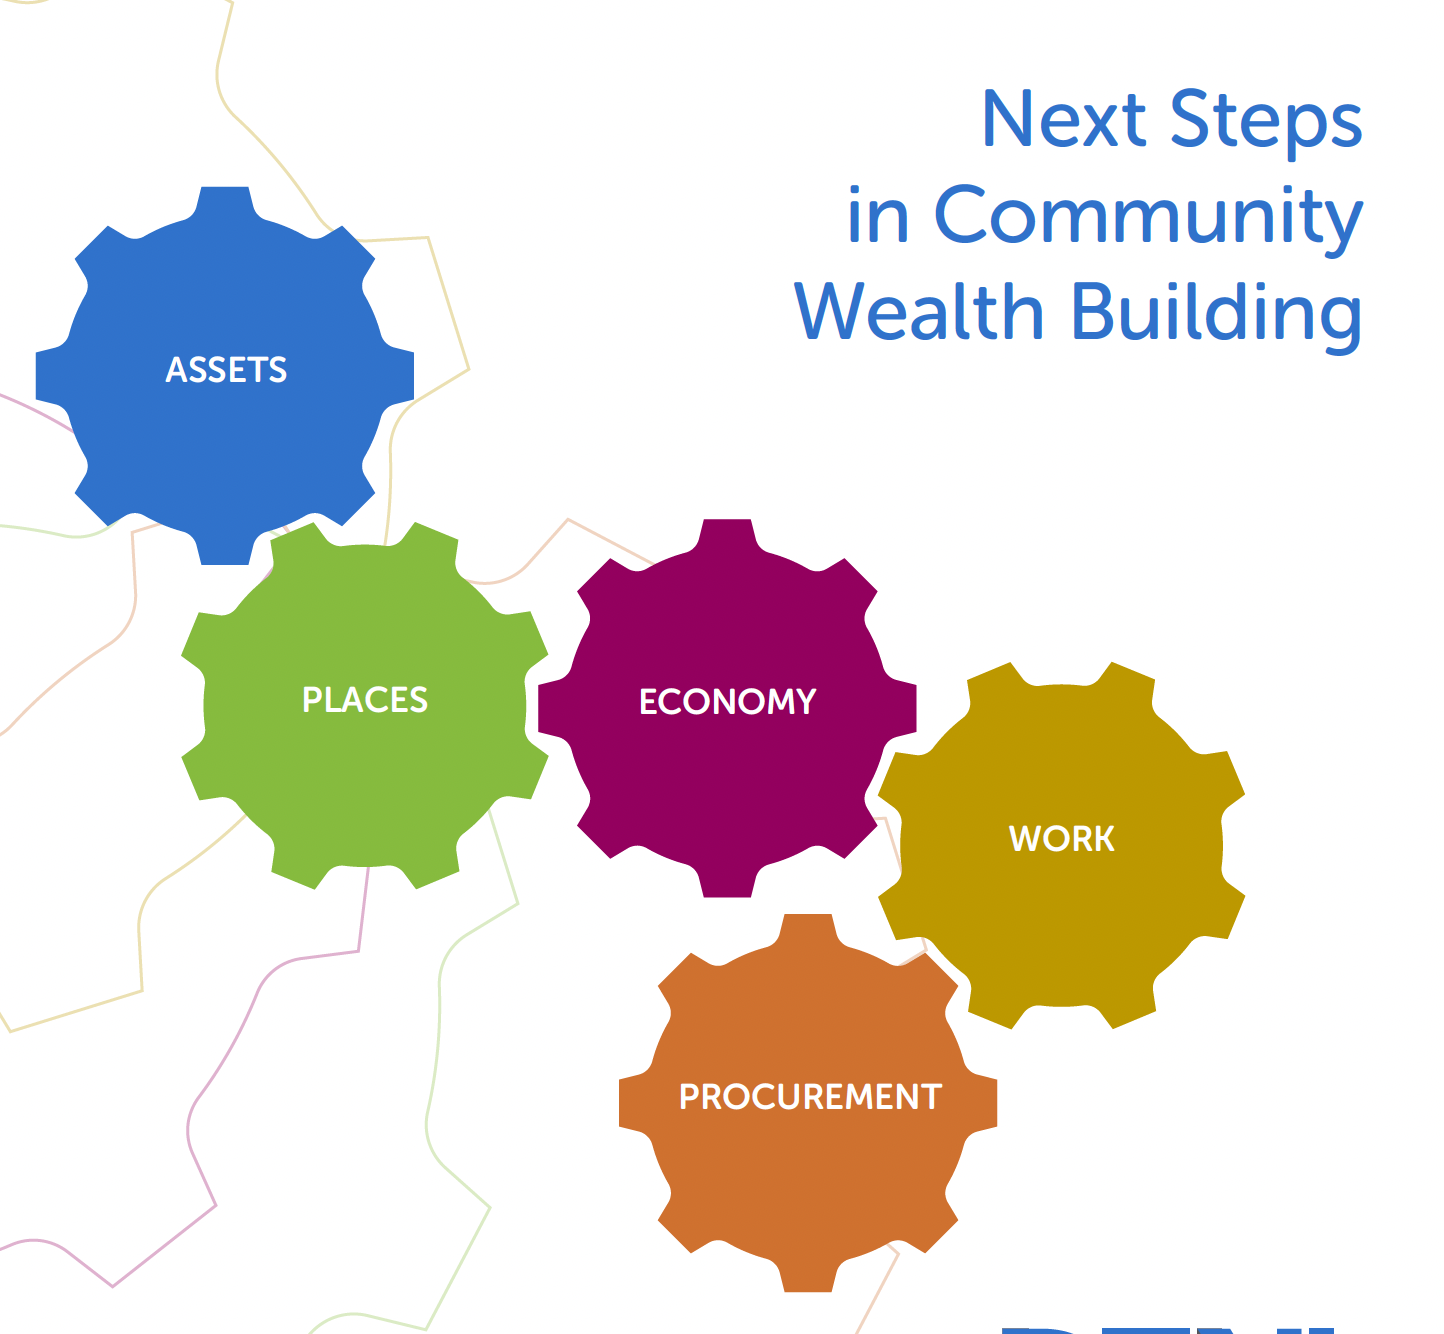 Next Steps in Community Wealth Building